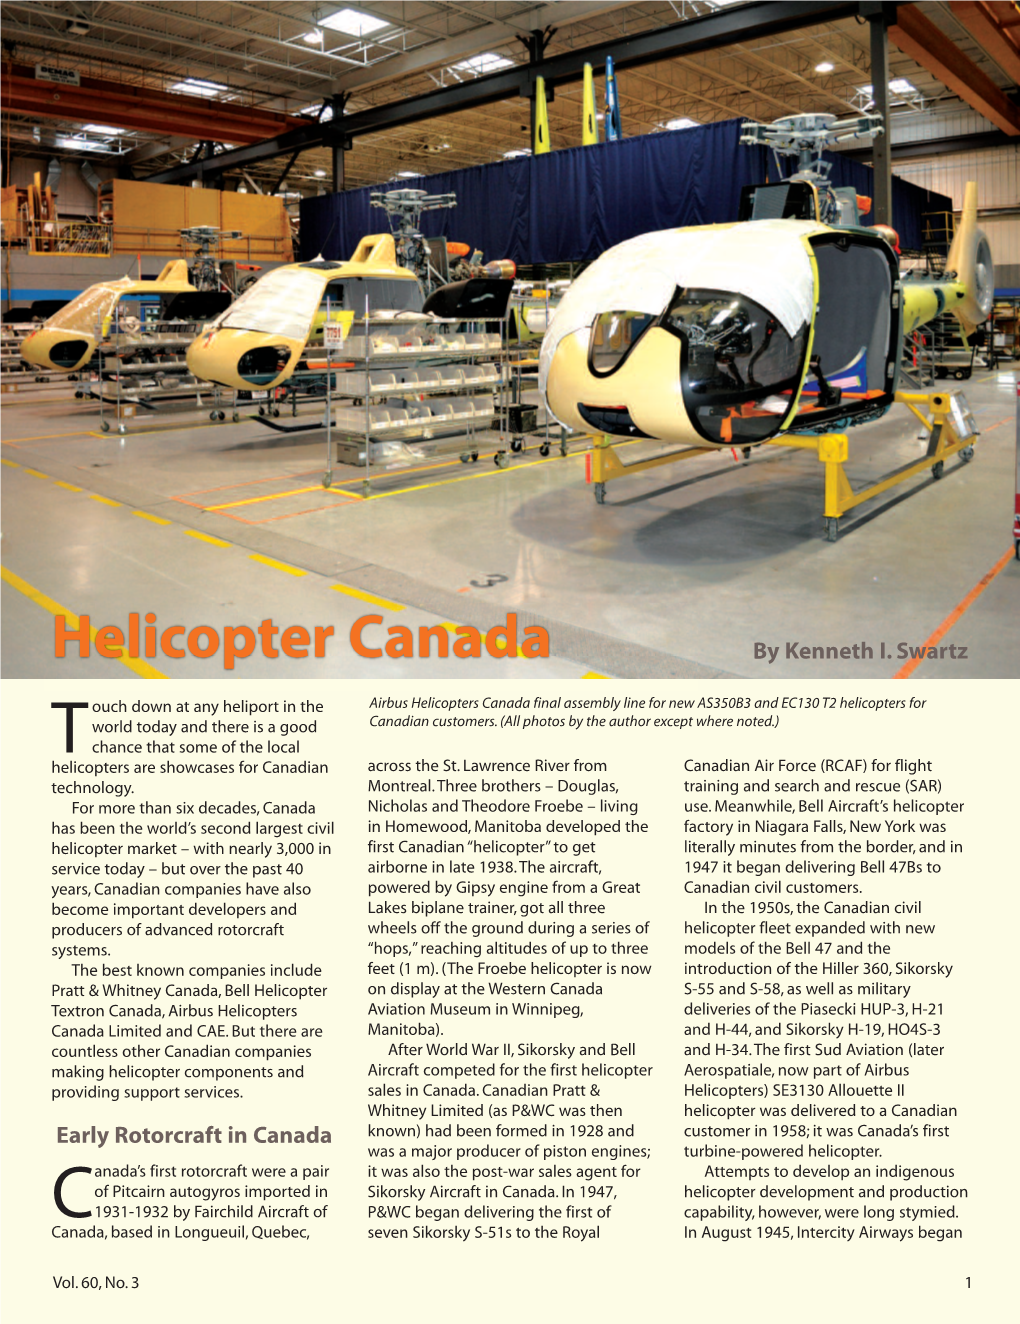 Helicopter Canada by Kenneth I